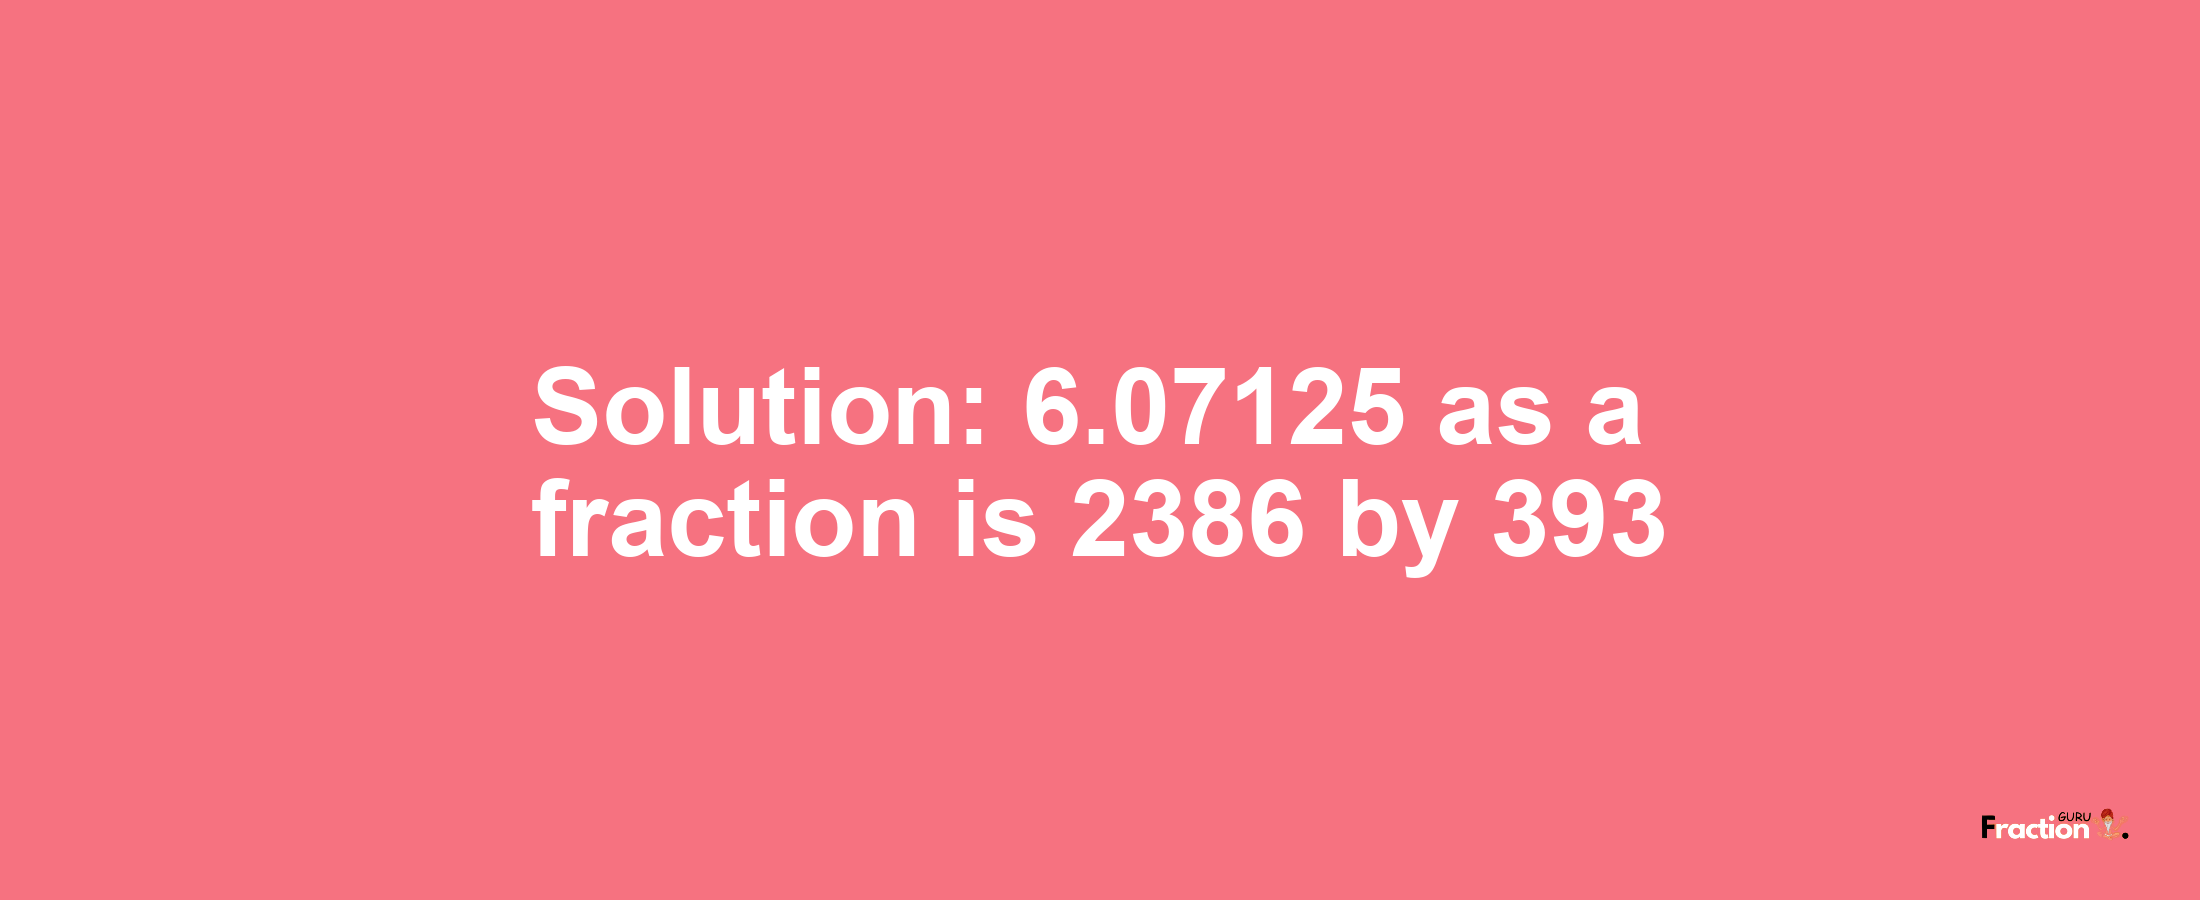 Solution:6.07125 as a fraction is 2386/393